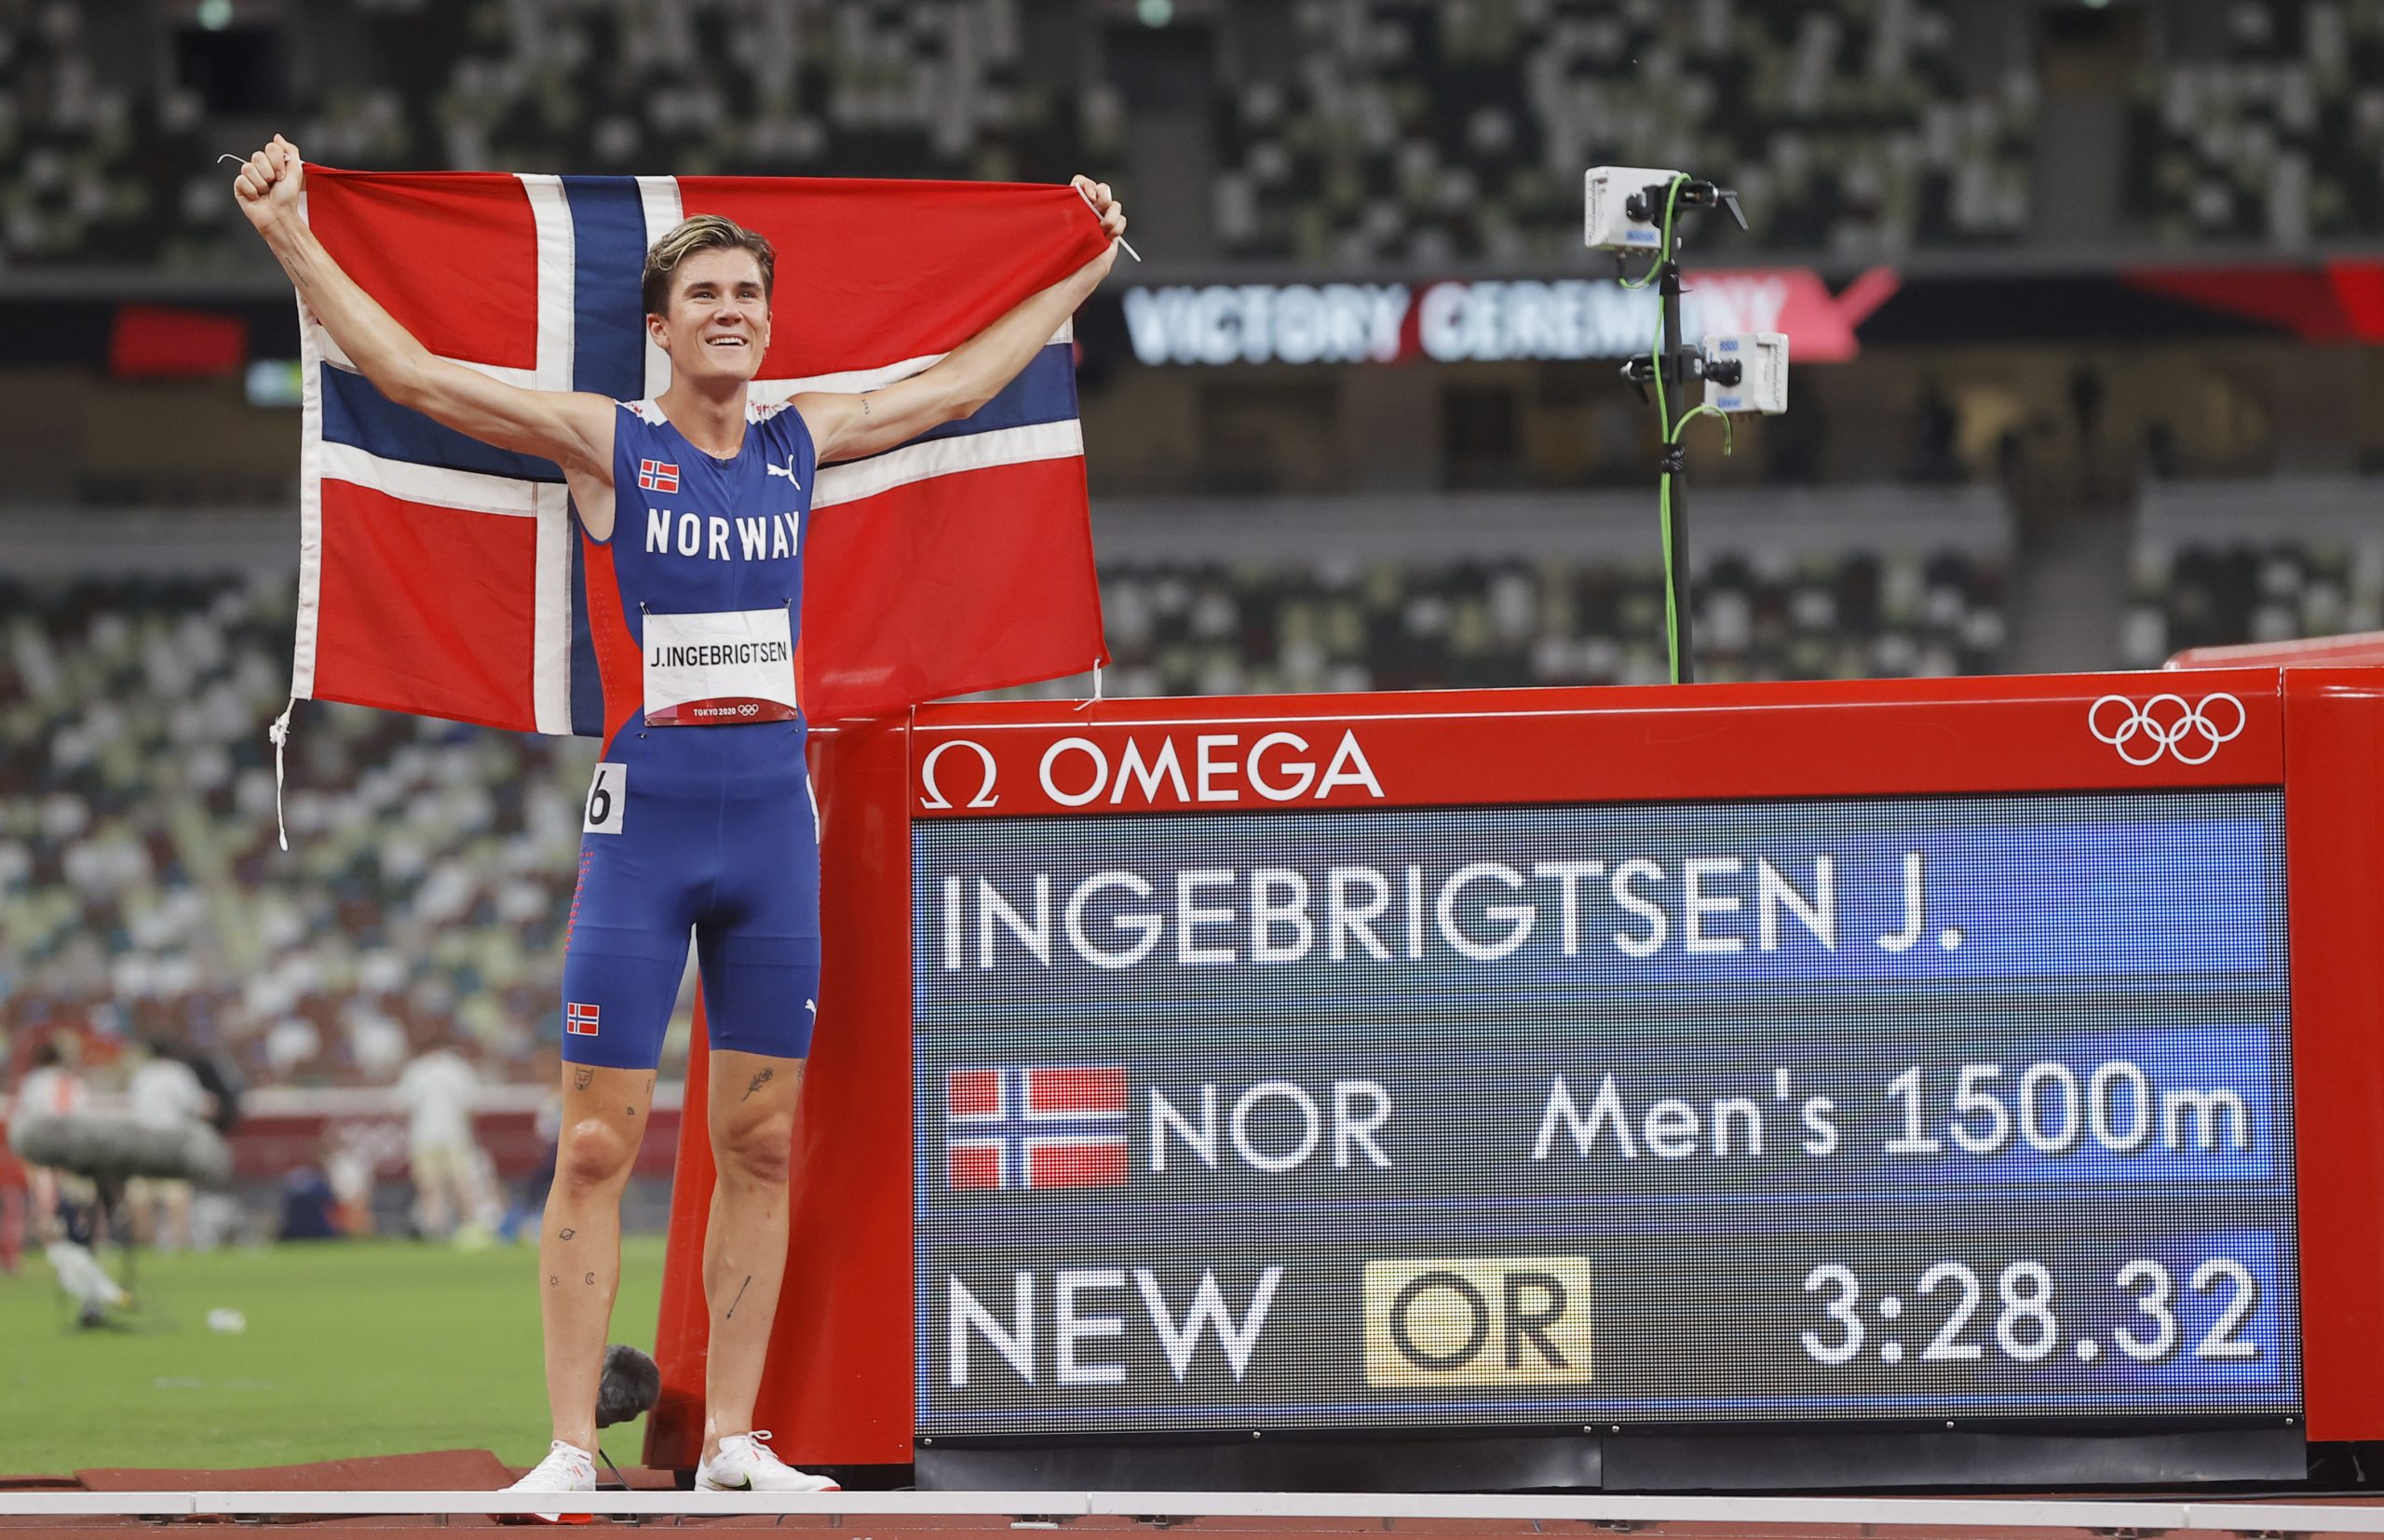 epa09403574 Jakob Ingebrigtsen of Norway celebrates after winning the Men's 1500m Final during the Athletics events of the Tokyo 2020 Olympic Games at the Olympic Stadium in Tokyo, Japan, 07 August 2021.  EPA/VALDRIN XHEMAJ